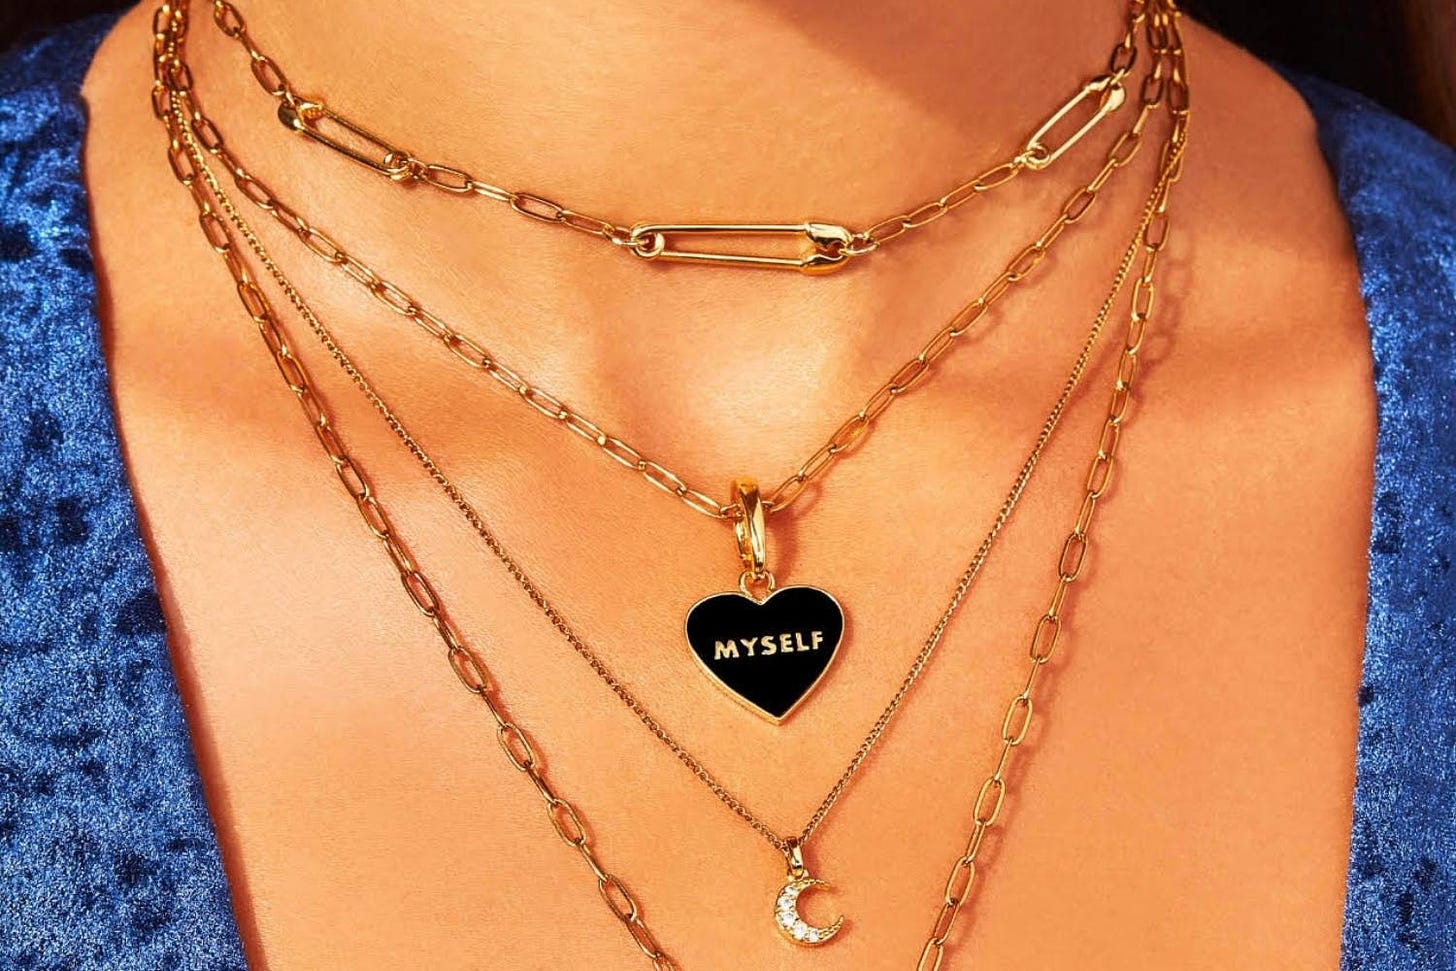 Woman's neck with four gold necklaces, one is a heart that reads "myself"